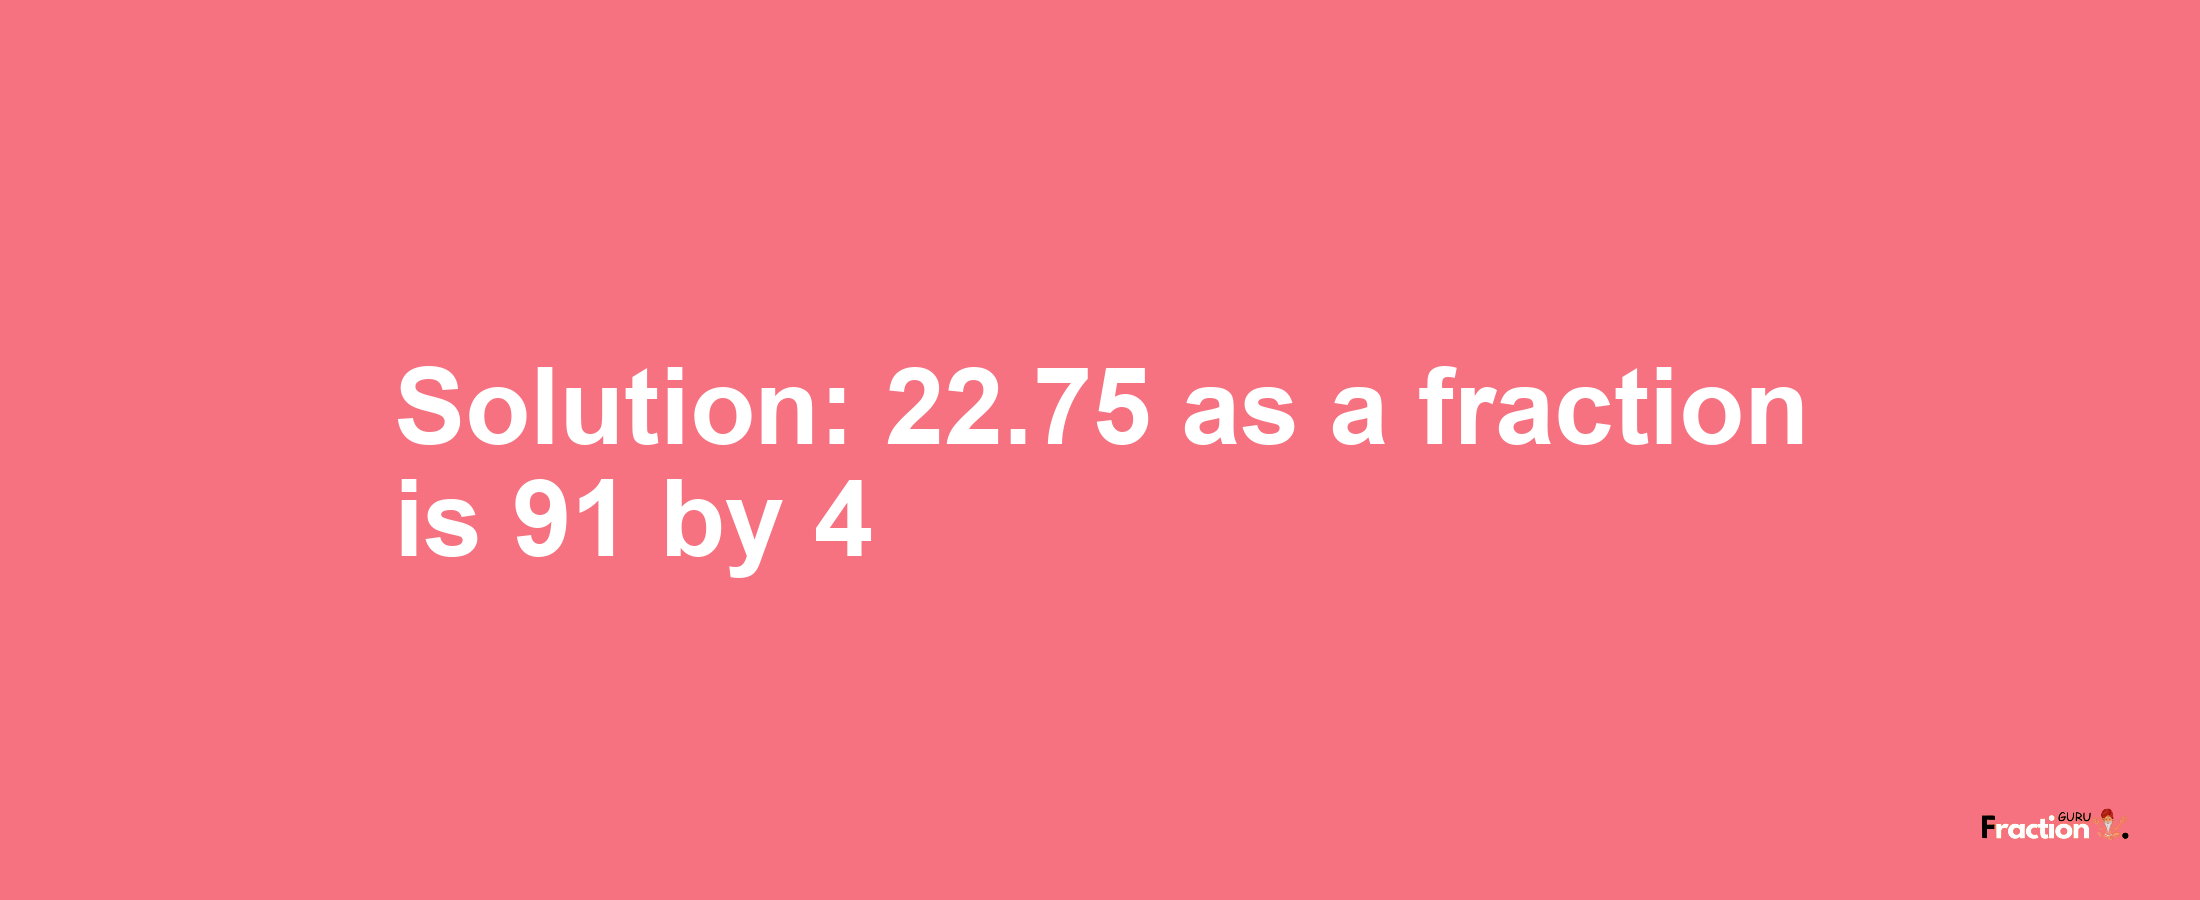 Solution:22.75 as a fraction is 91/4